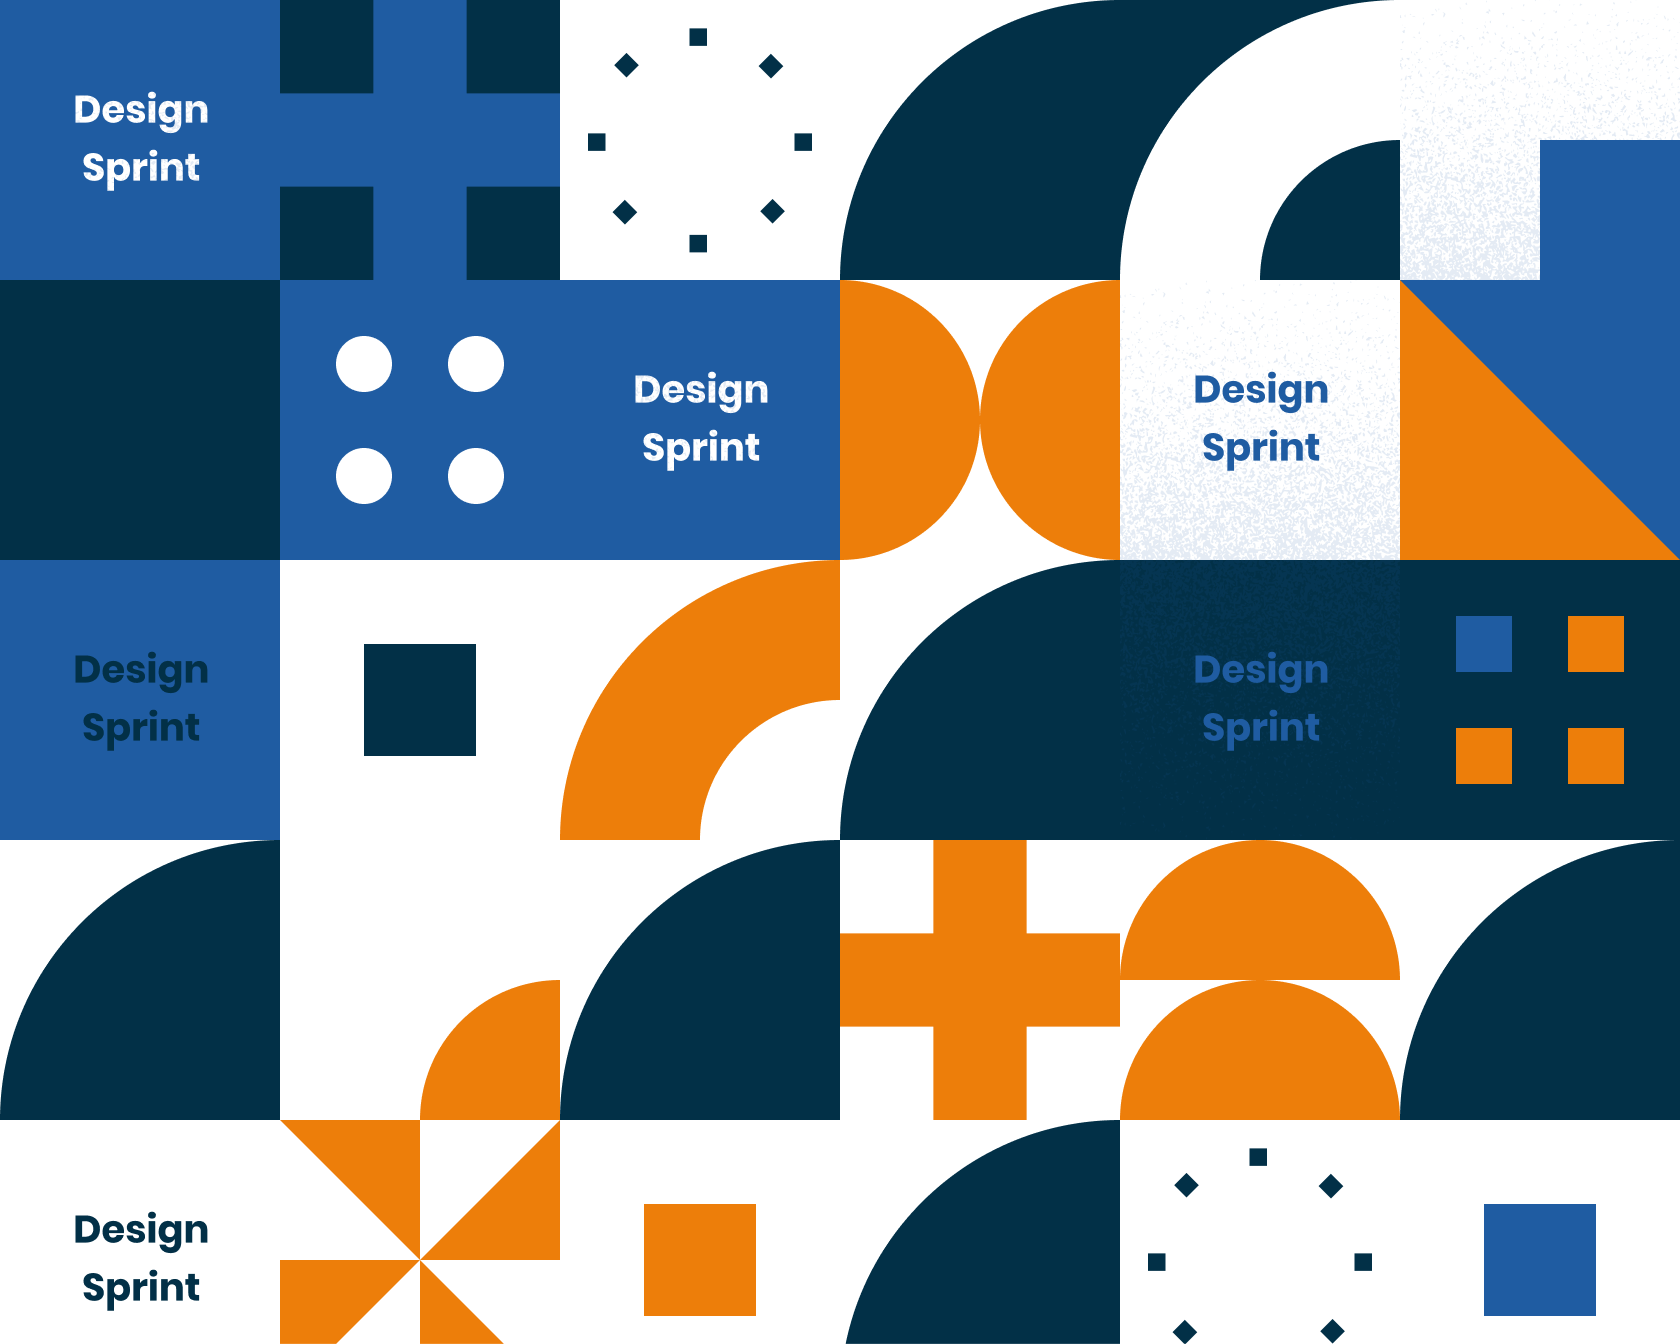 Generate new ideas with our design sprint training